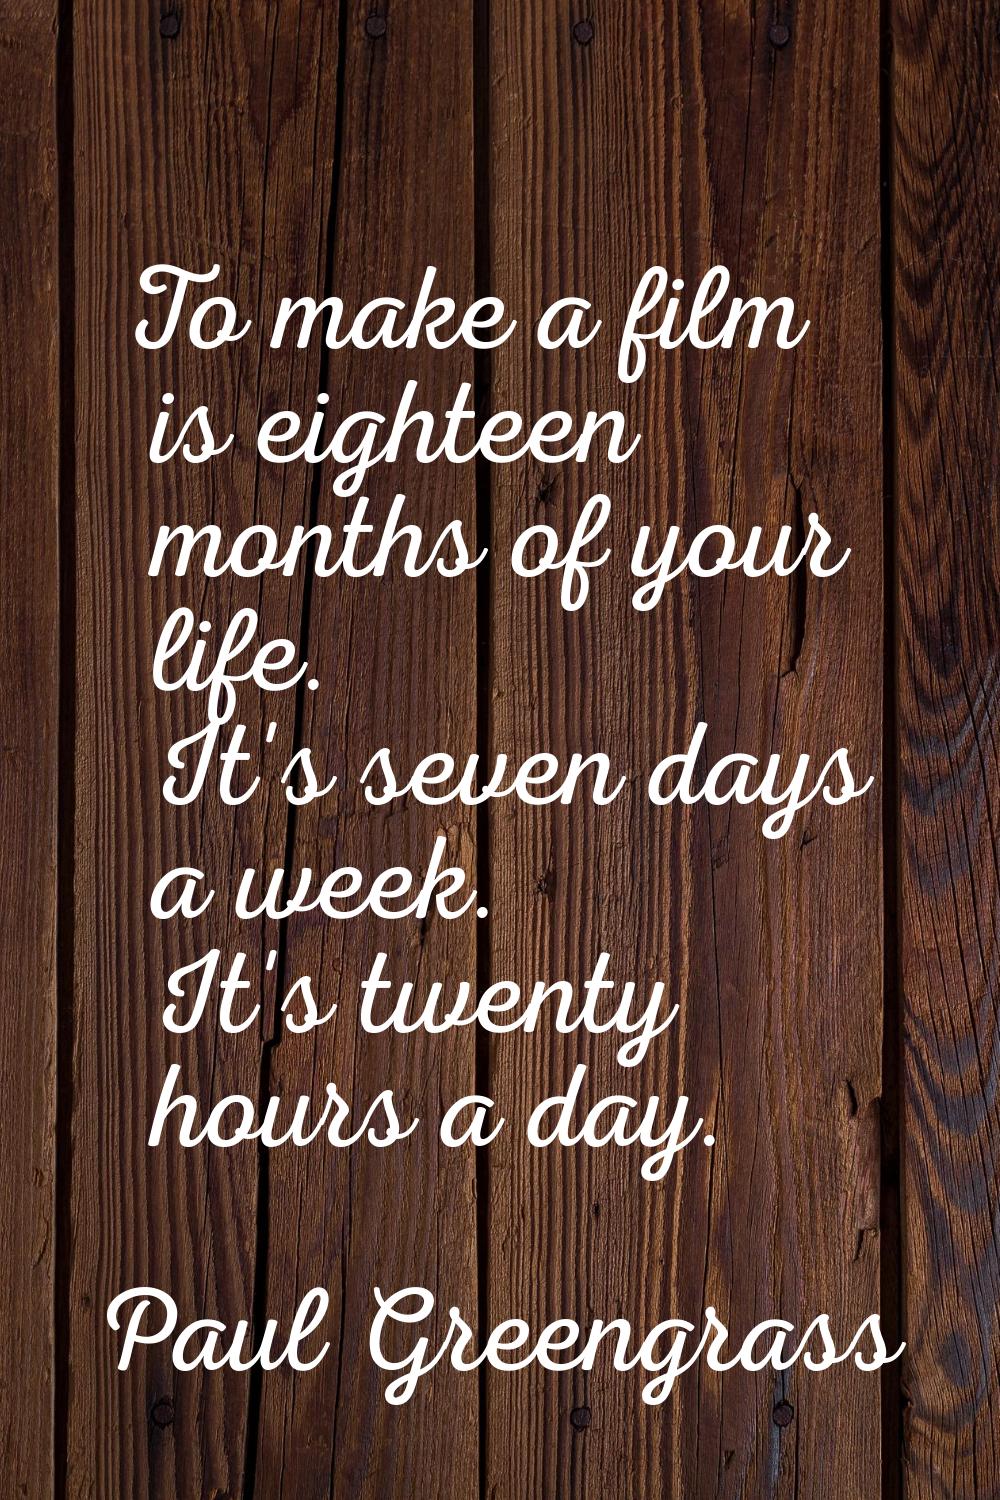 To make a film is eighteen months of your life. It's seven days a week. It's twenty hours a day.